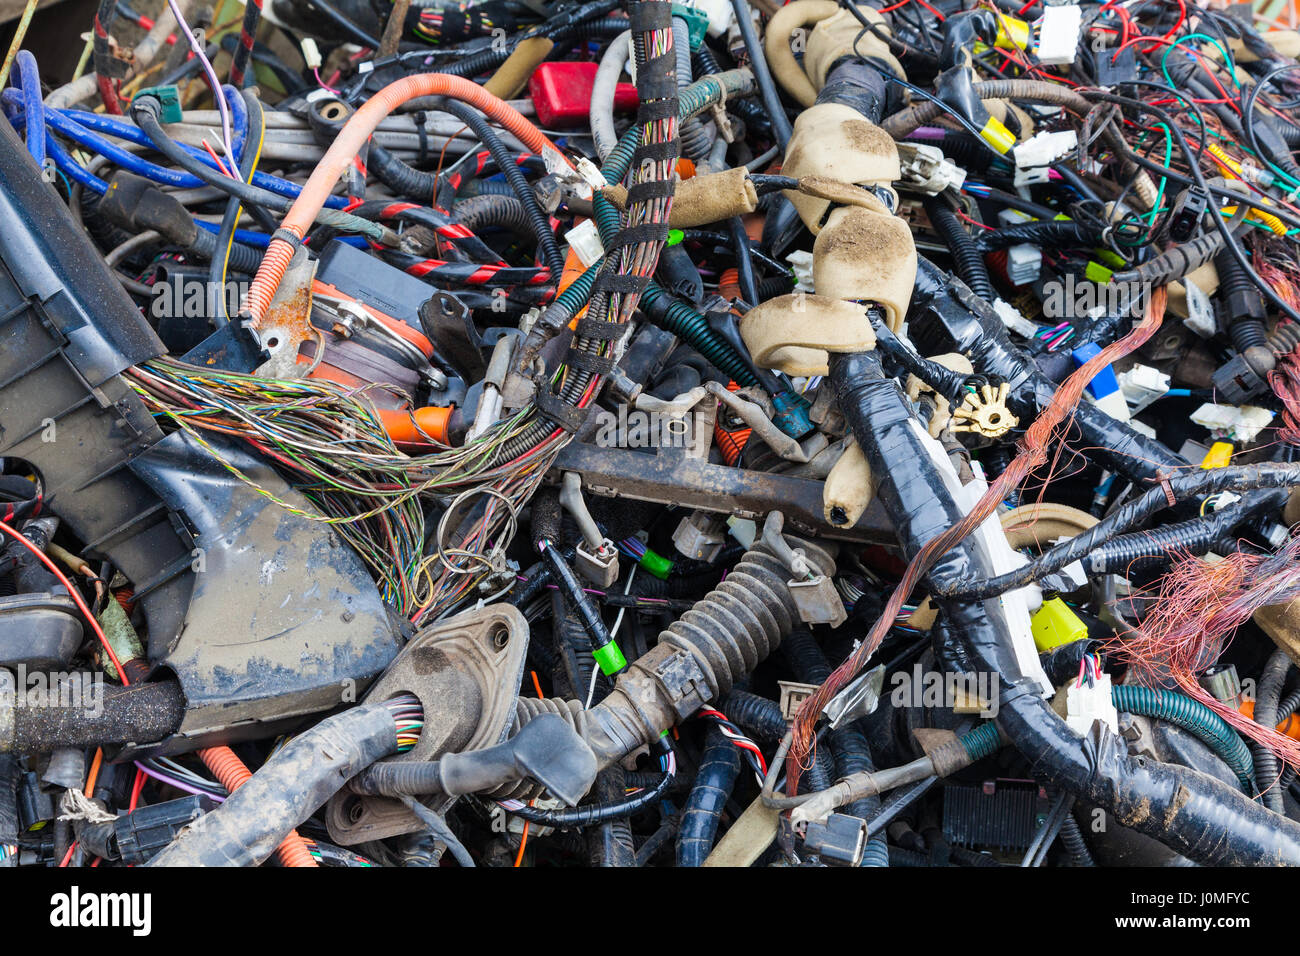 Scrap electrical wiring bundles salvaged from vehicles Stock Photo